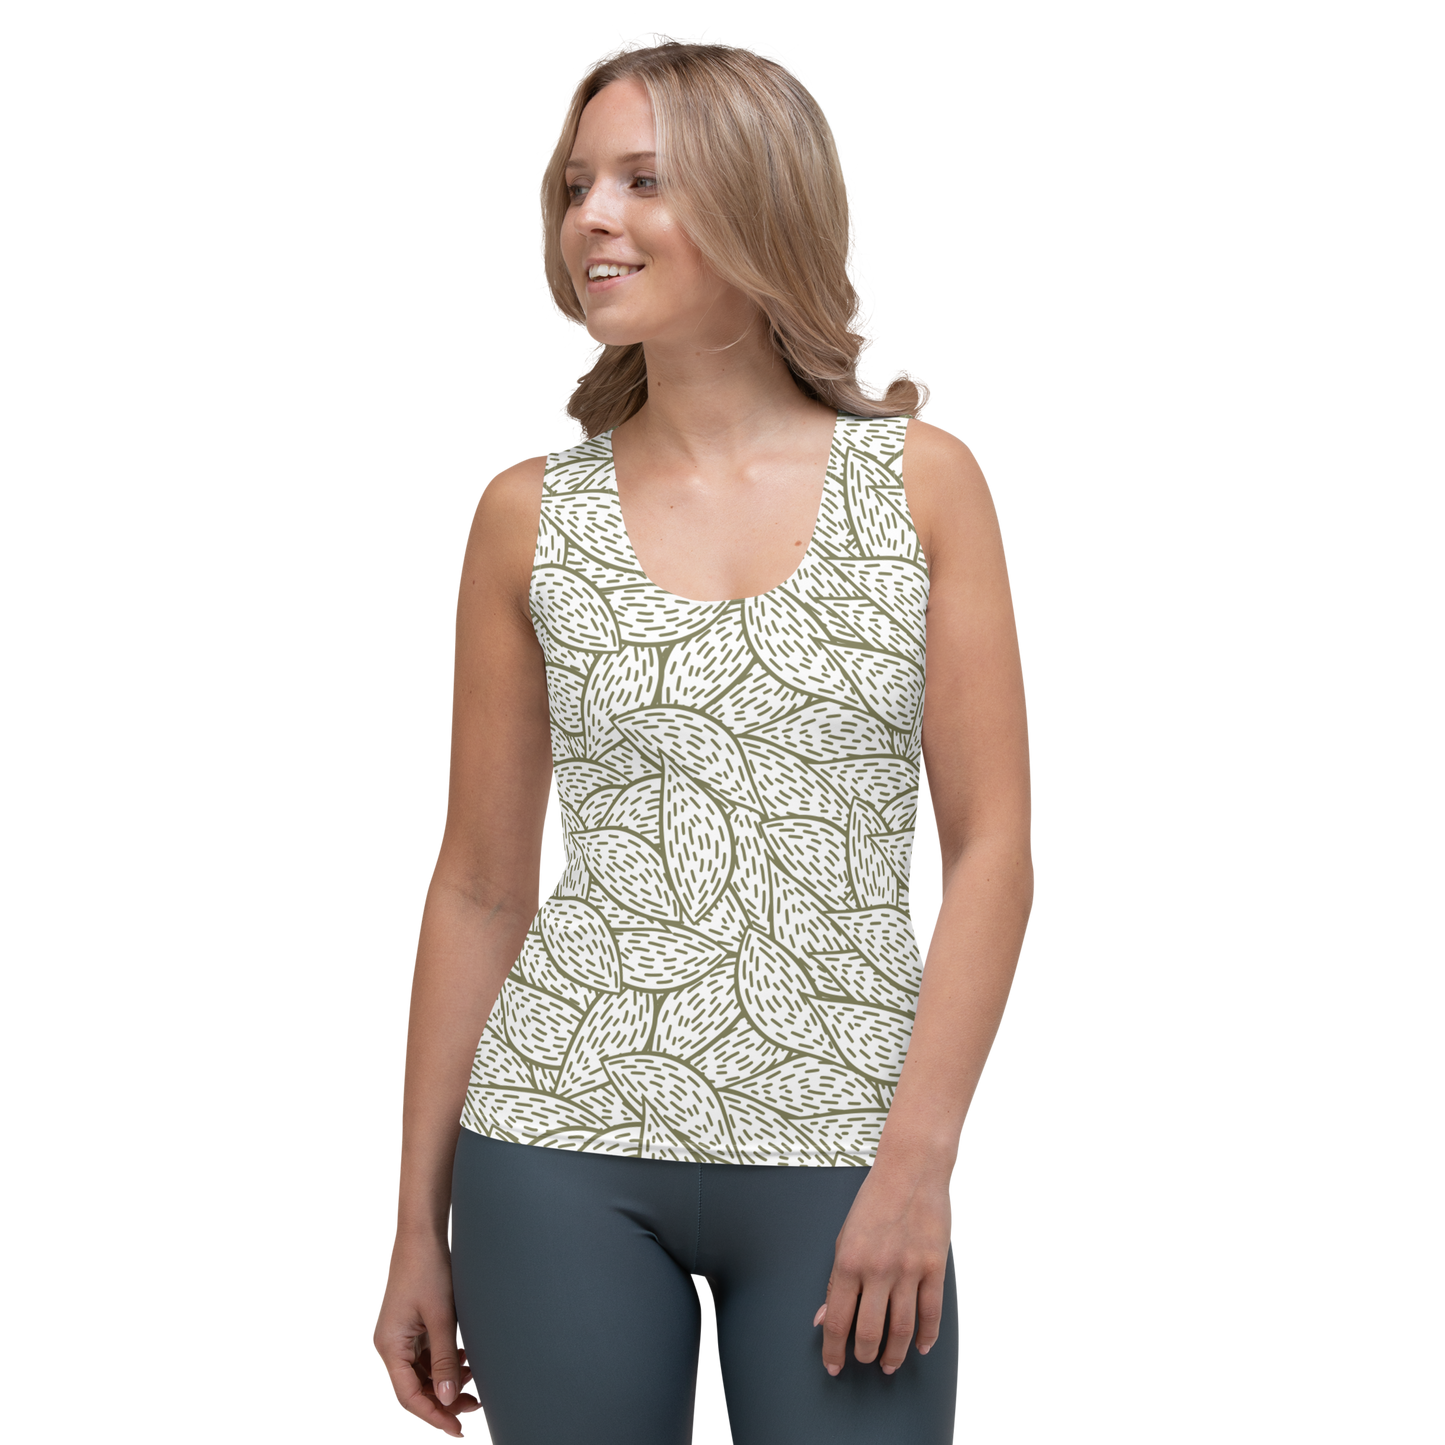 Colorful Fall Leaves | Seamless Patterns | All-Over Print Women's Tank Top - #6